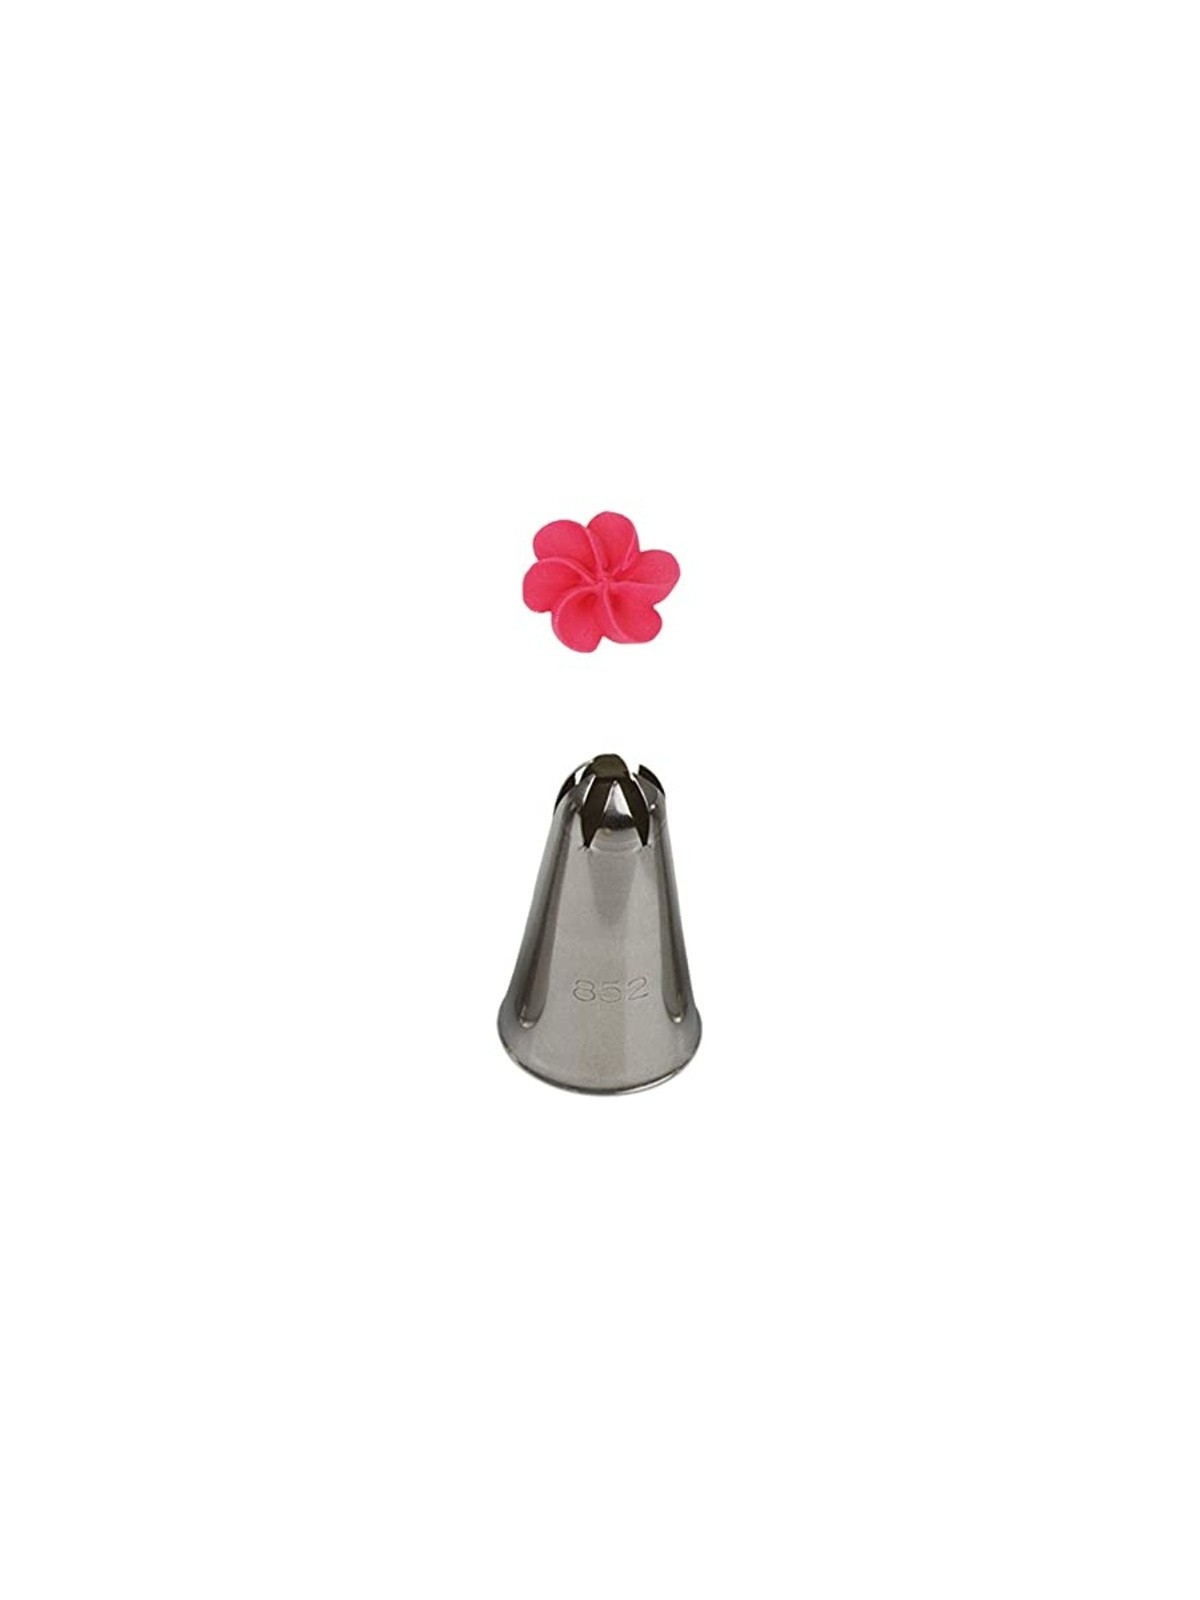 Decora Decorating Tip 2D / 852 Dropflower Carded